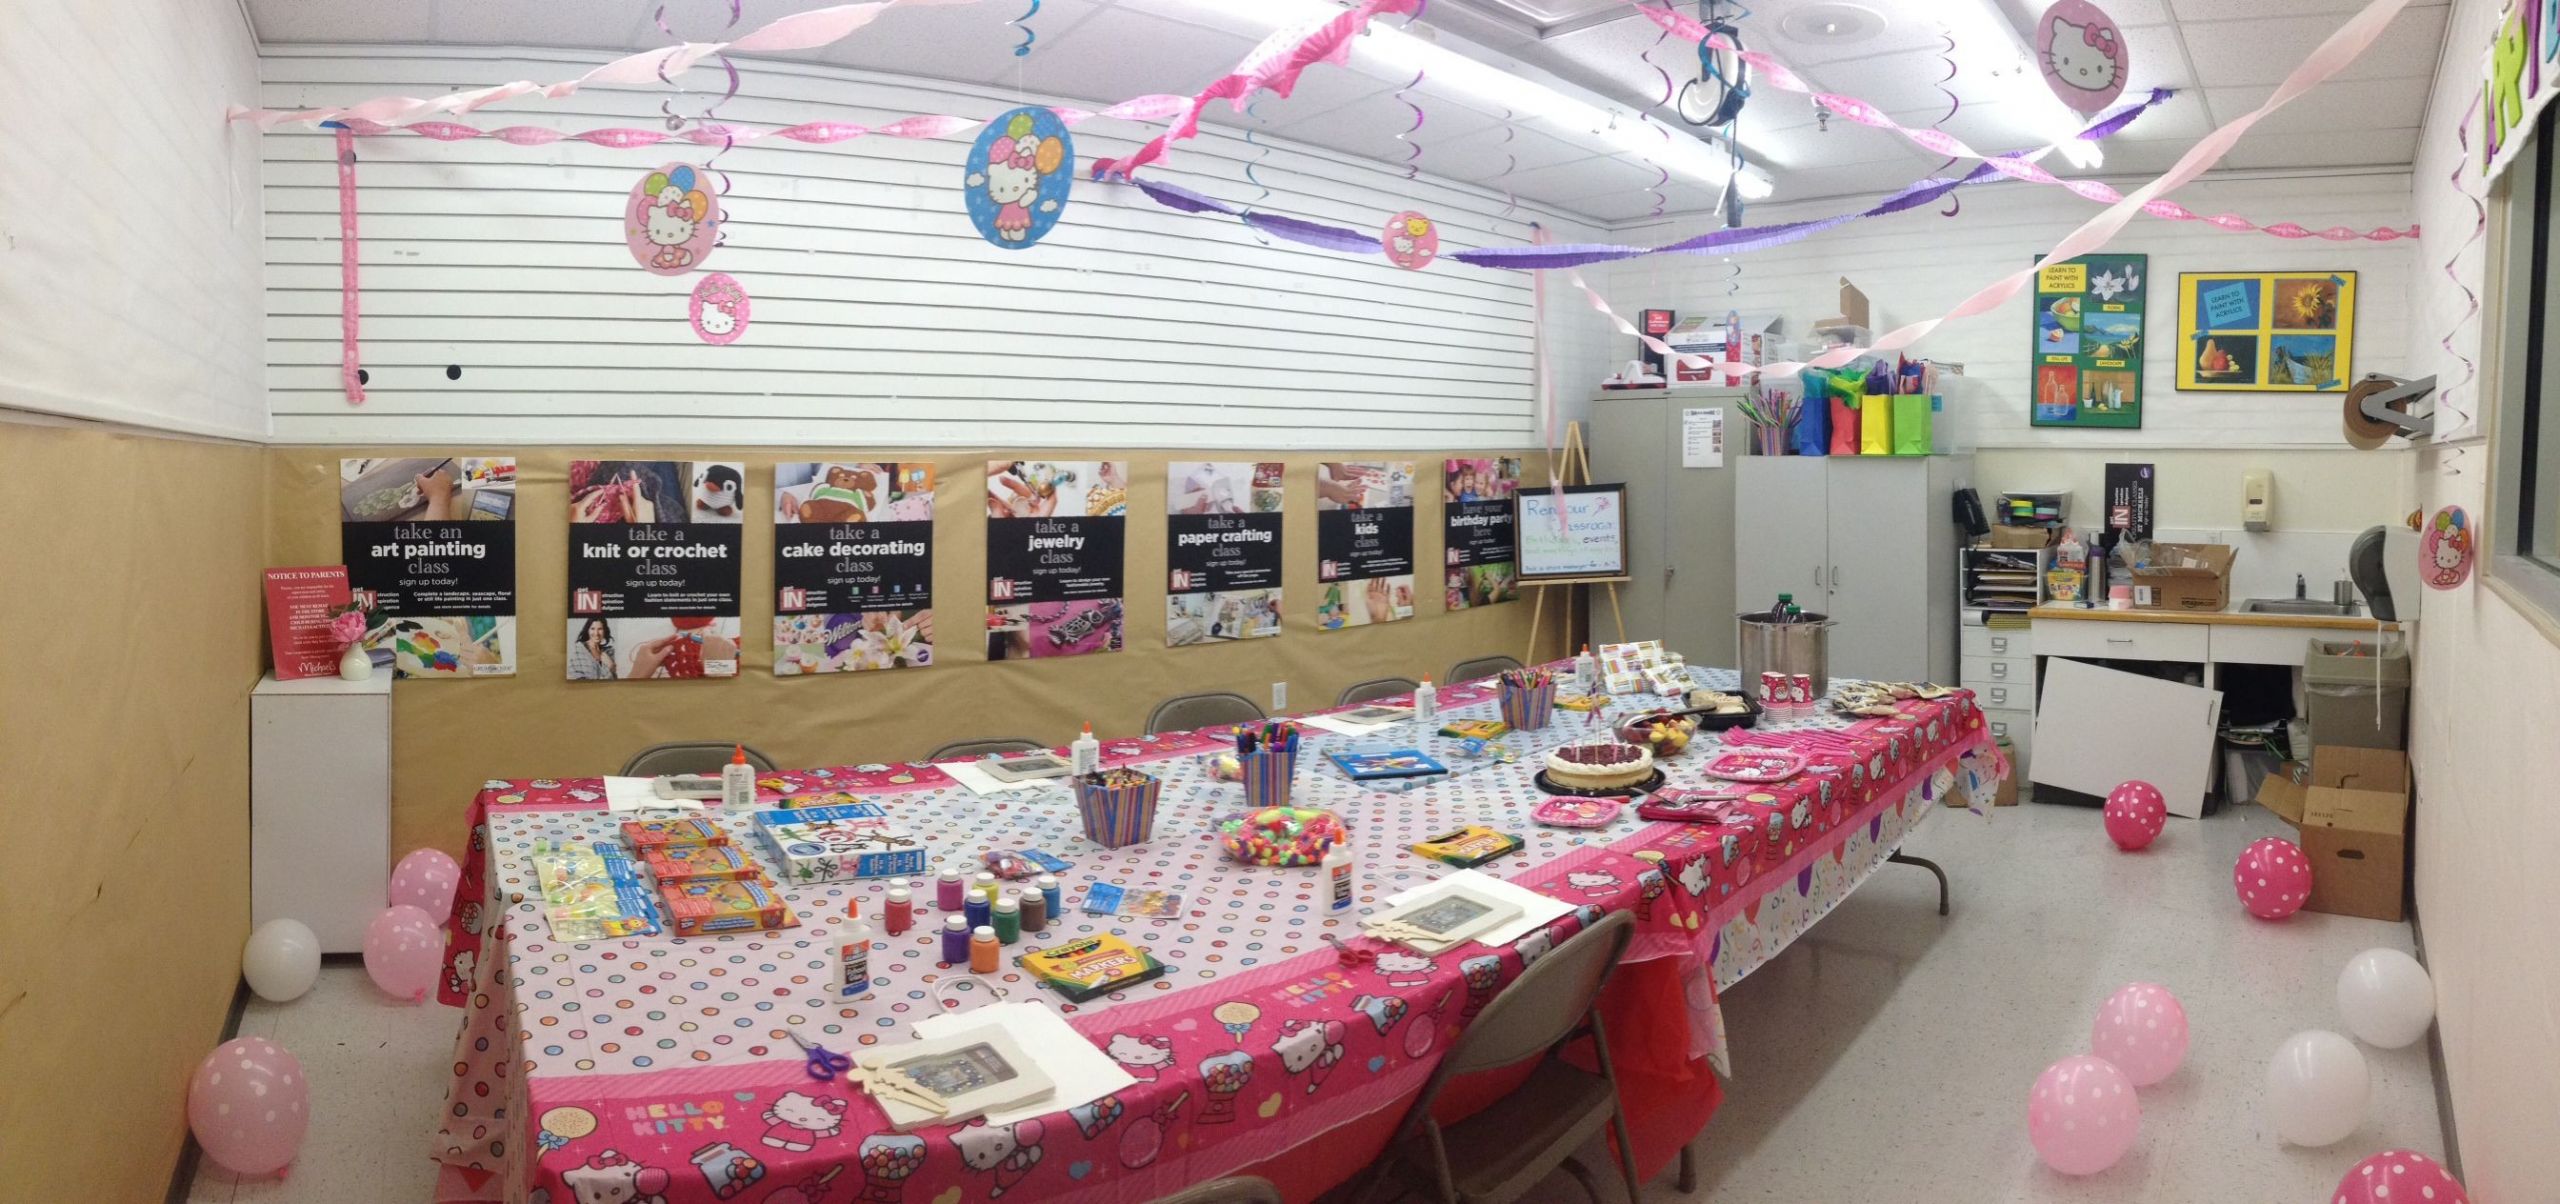 Birthday Party At Michaels
 Pin by Sharon Bryce on Michaels The Arts and Crafts